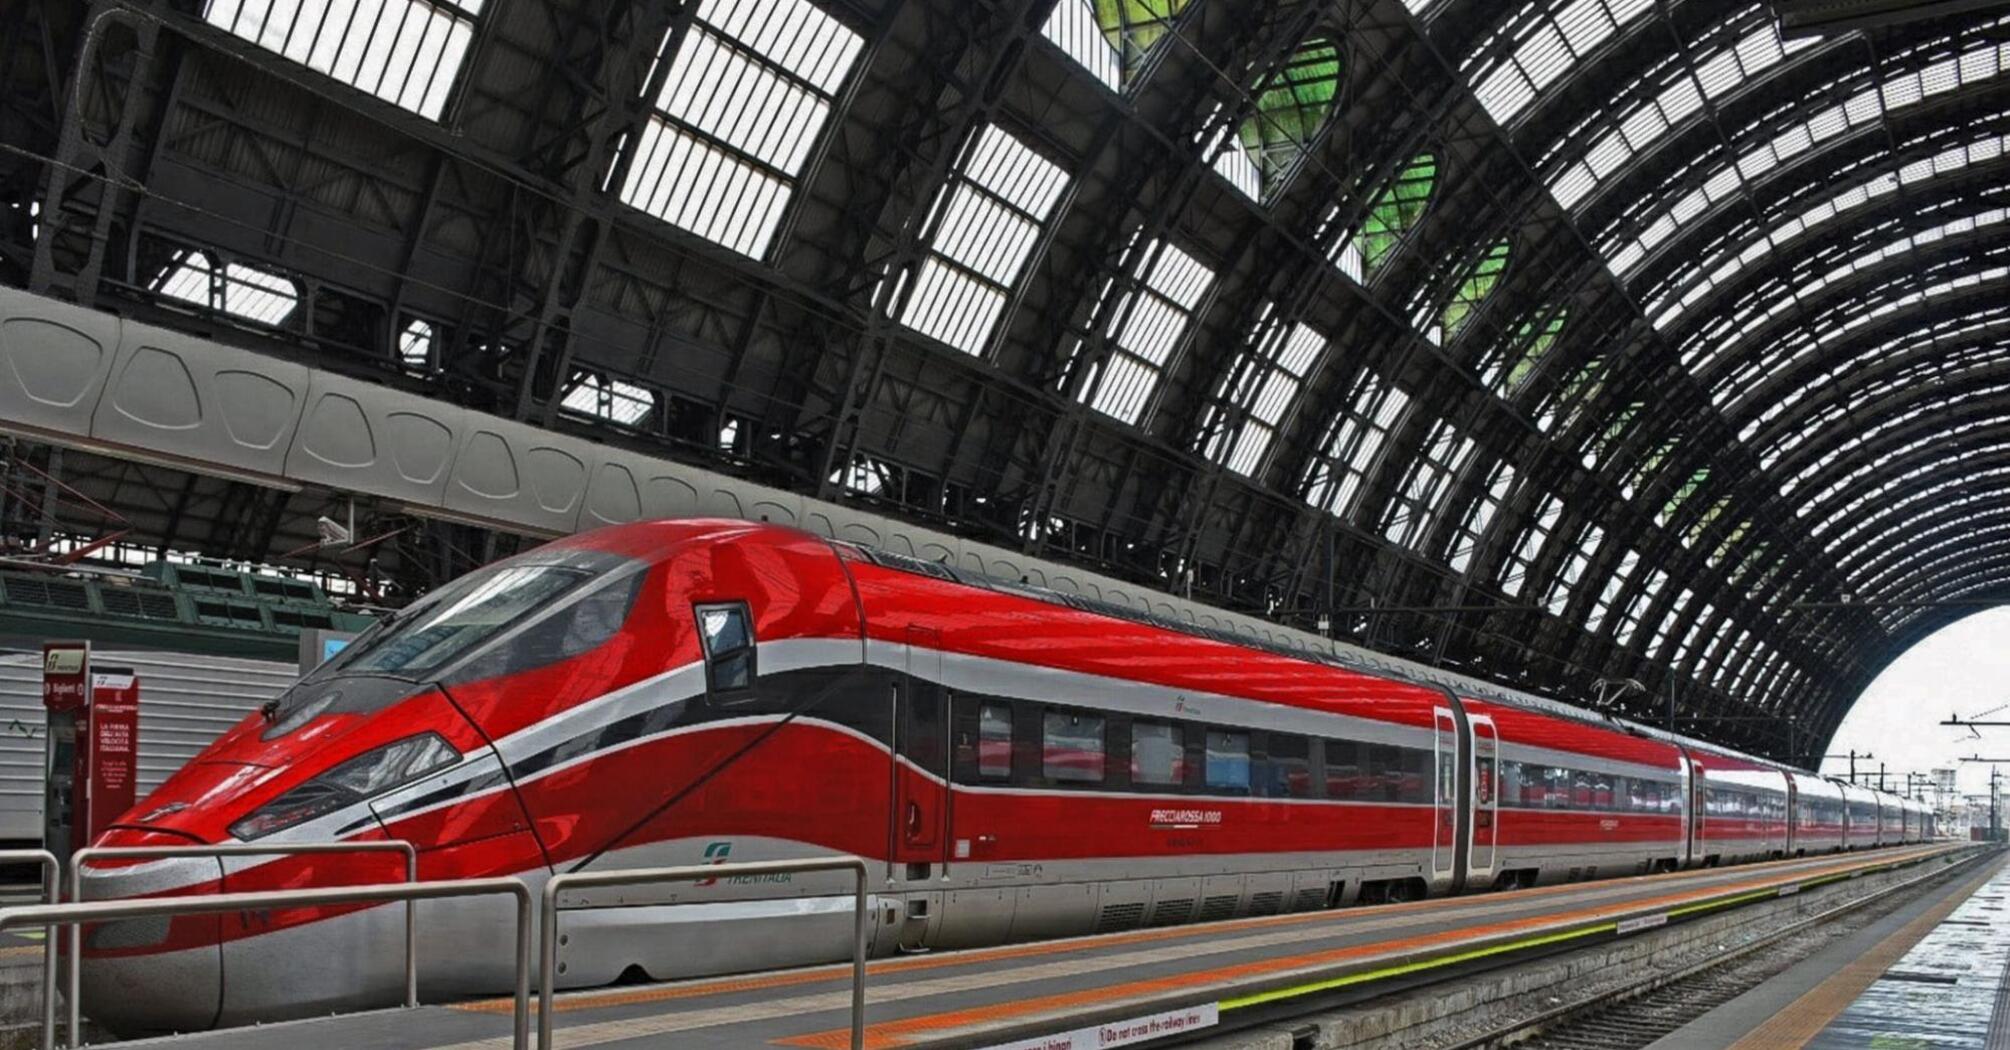 New red high-speed train in all its glory